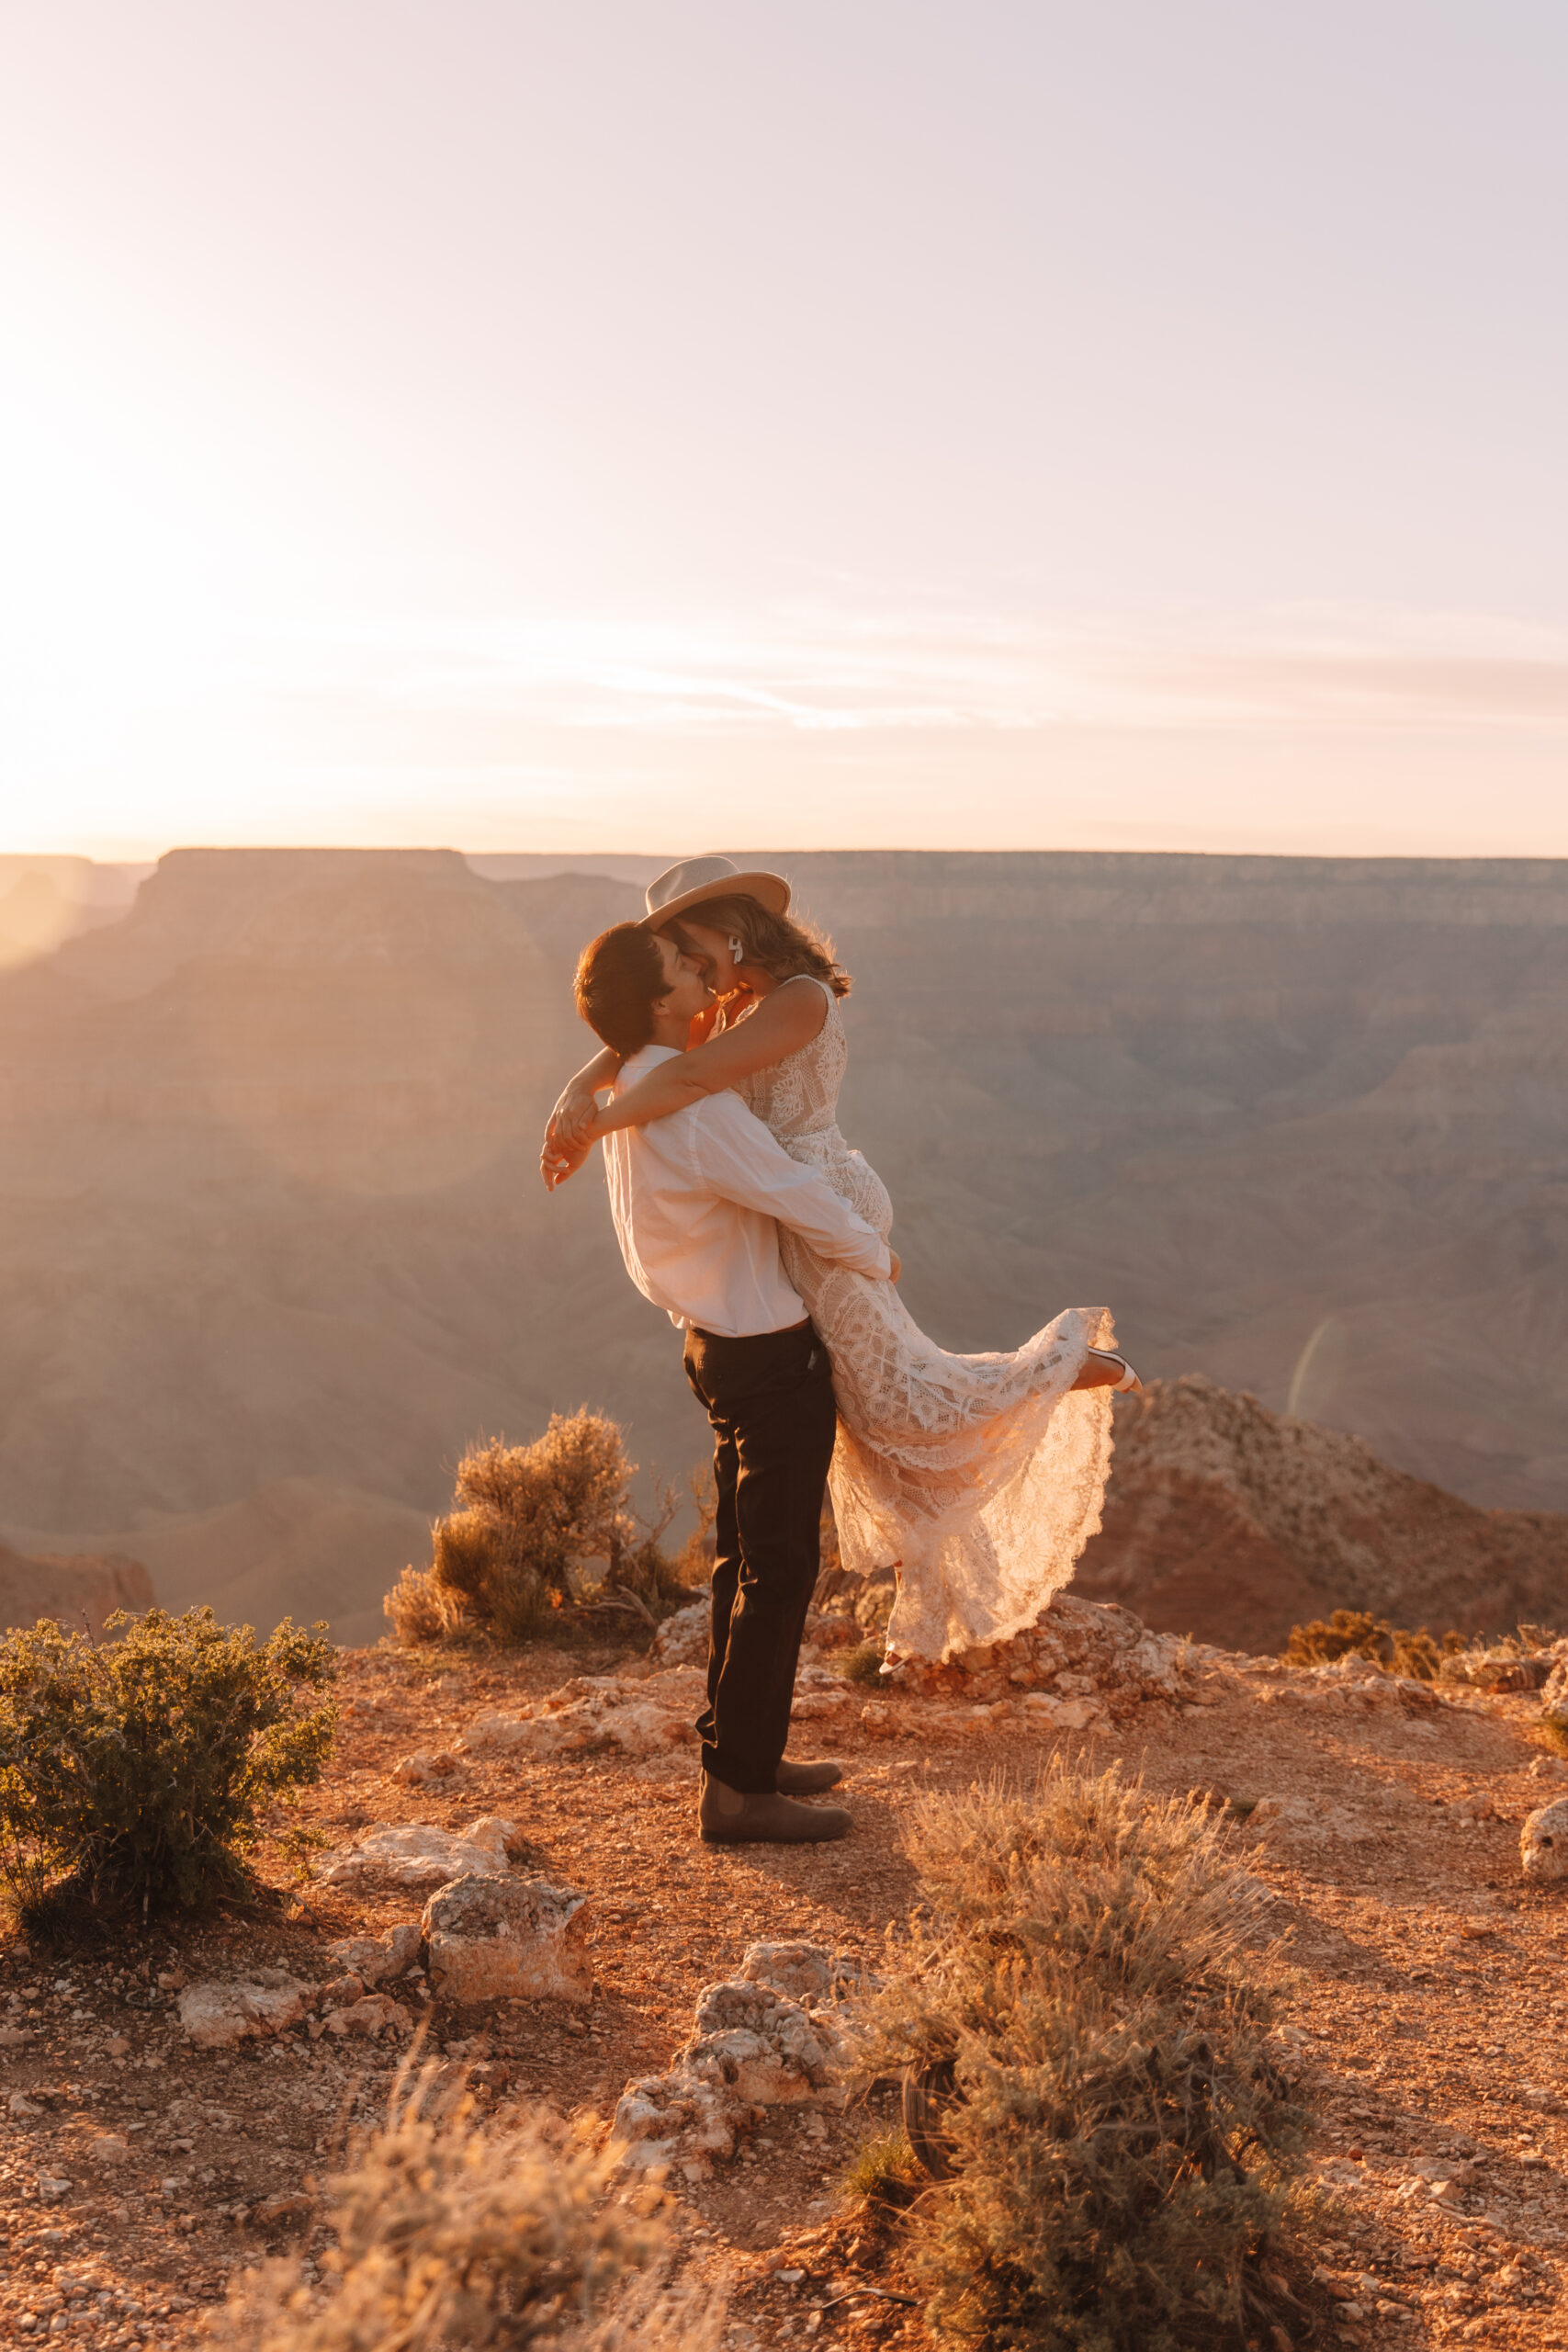 Groom picking up his bride standing on the edge of a cliff at The Grand Canyon in Arizona with the vast canyons in the background. Her leg lifts up passionately as they kiss. She is wearing a hat and a lace wedding dress